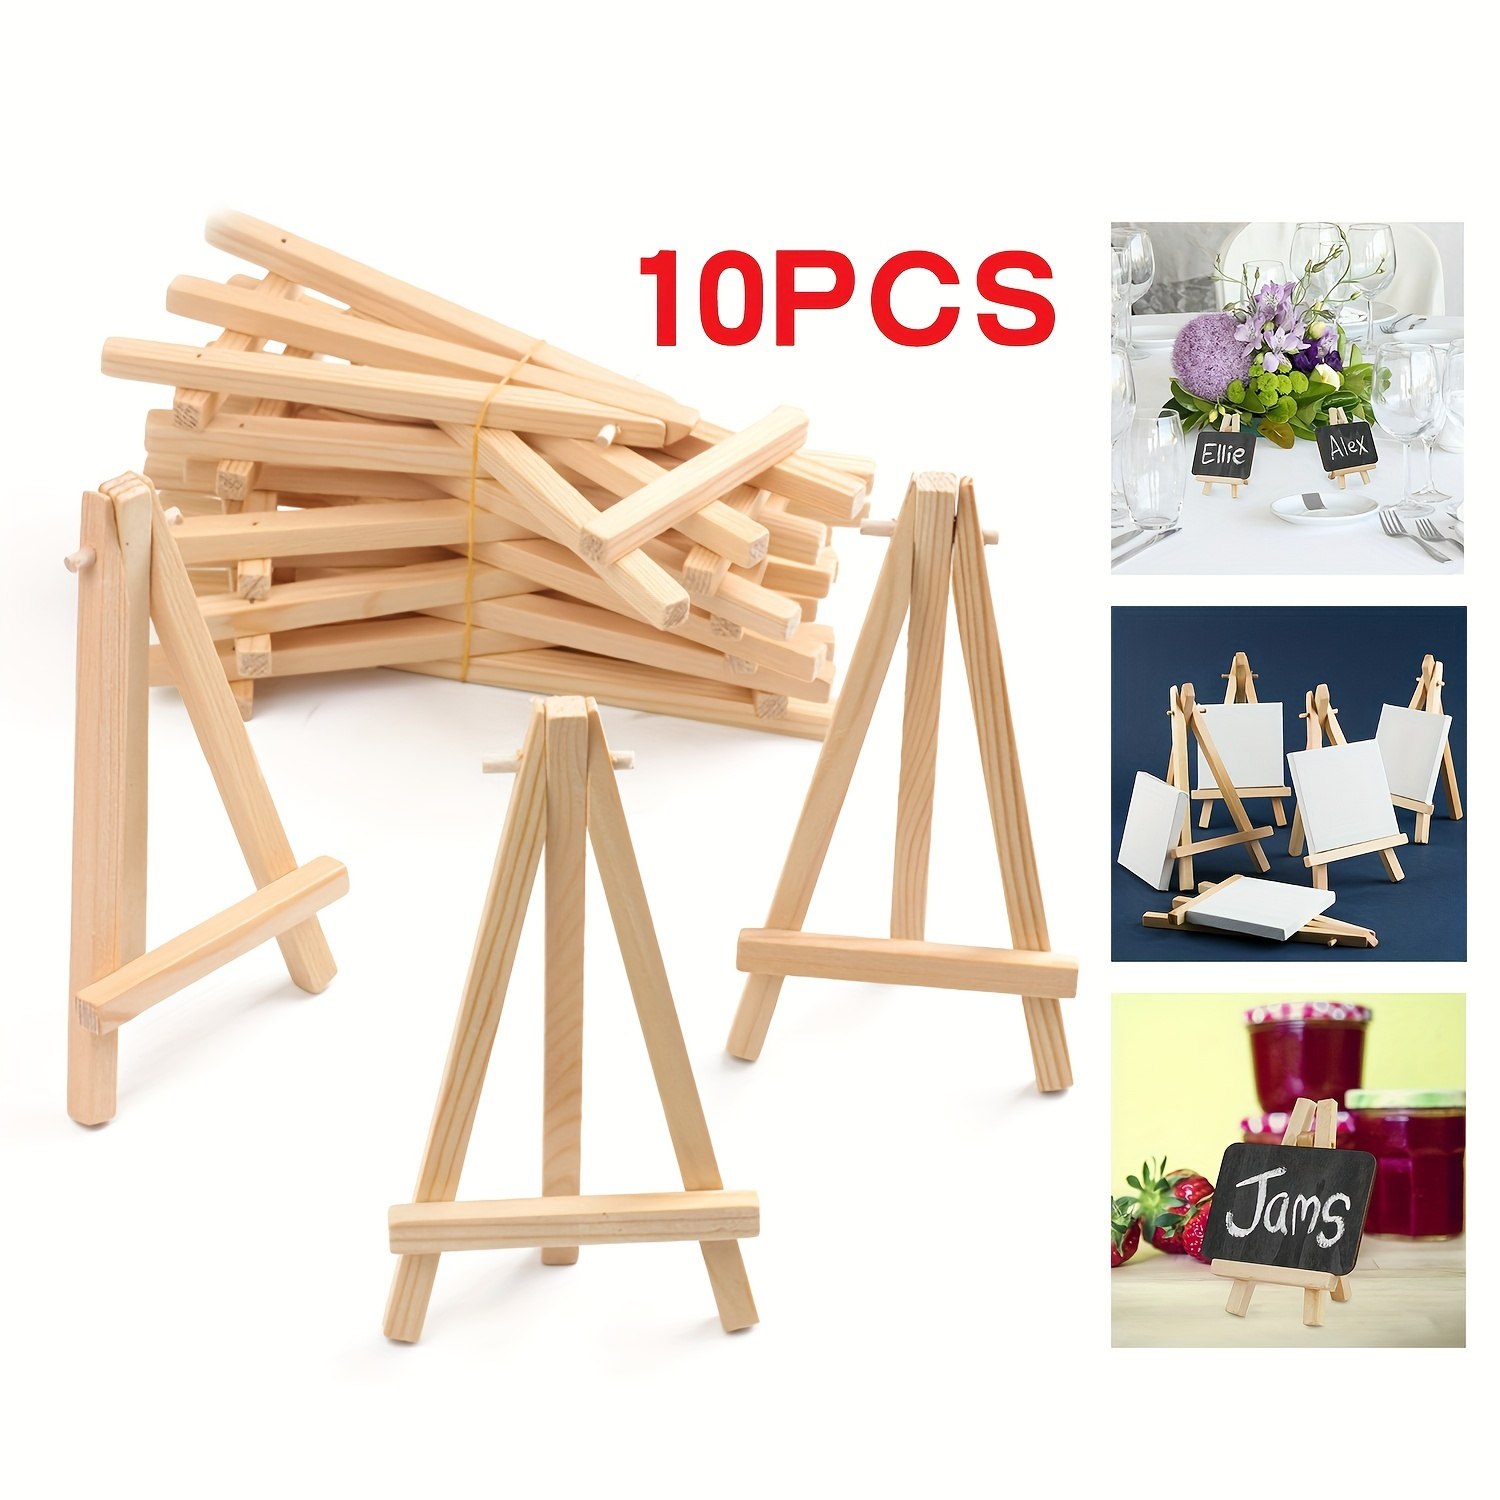 

Wooden Easel 10pcs Mini Artist Wooden Easel Wood Wedding Table Card Stand Display Holder